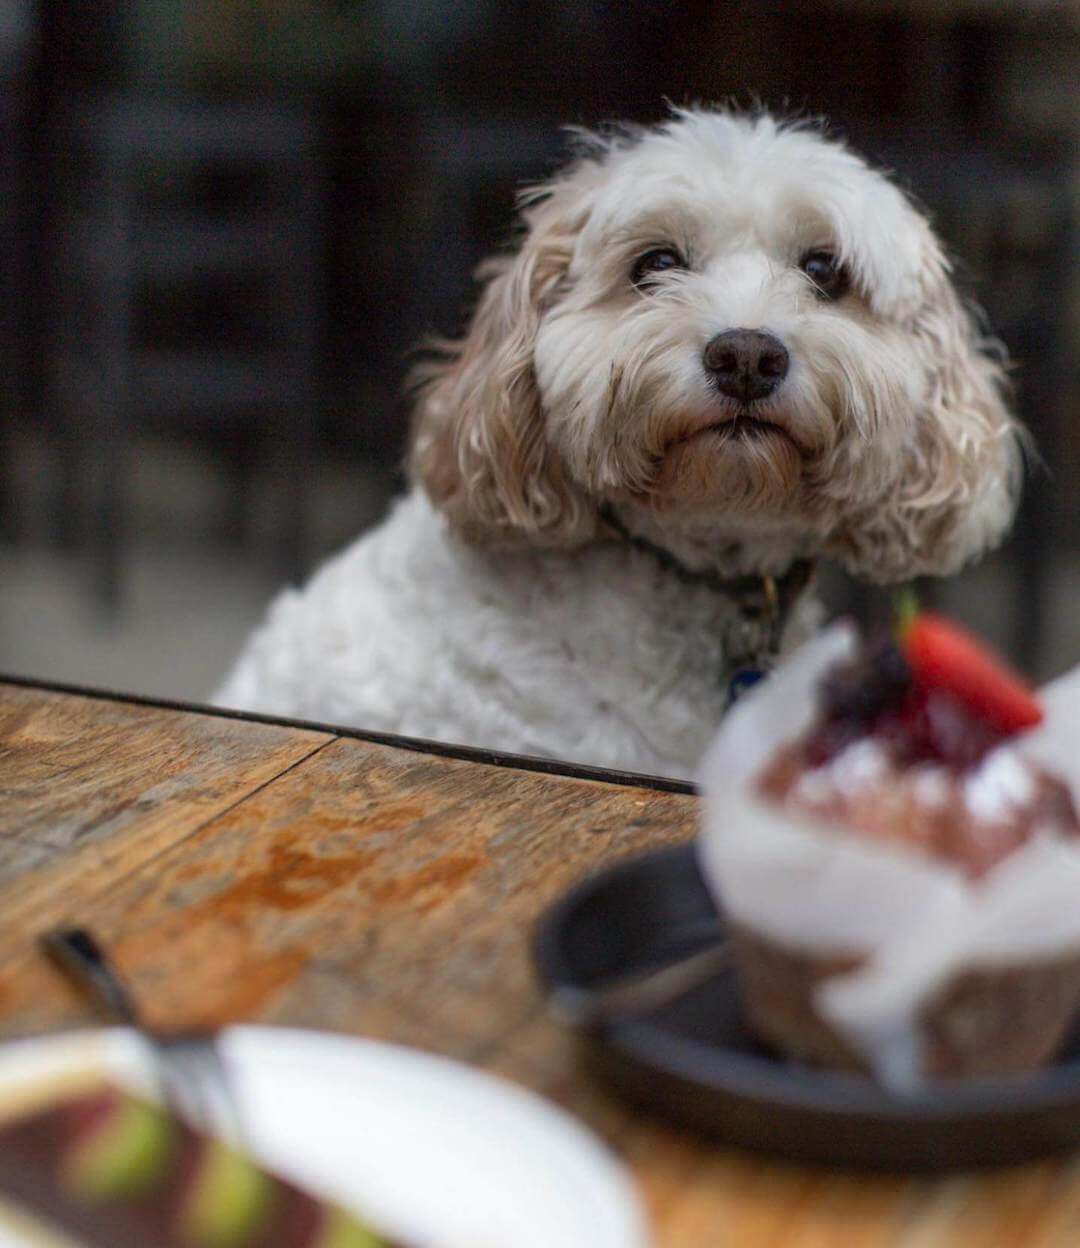 Ladygreen Brighton is a fabulous cafe for dog owners to enjoy amazing Melbourne breakfast, best brunch in Melbourne, lunch options and more.